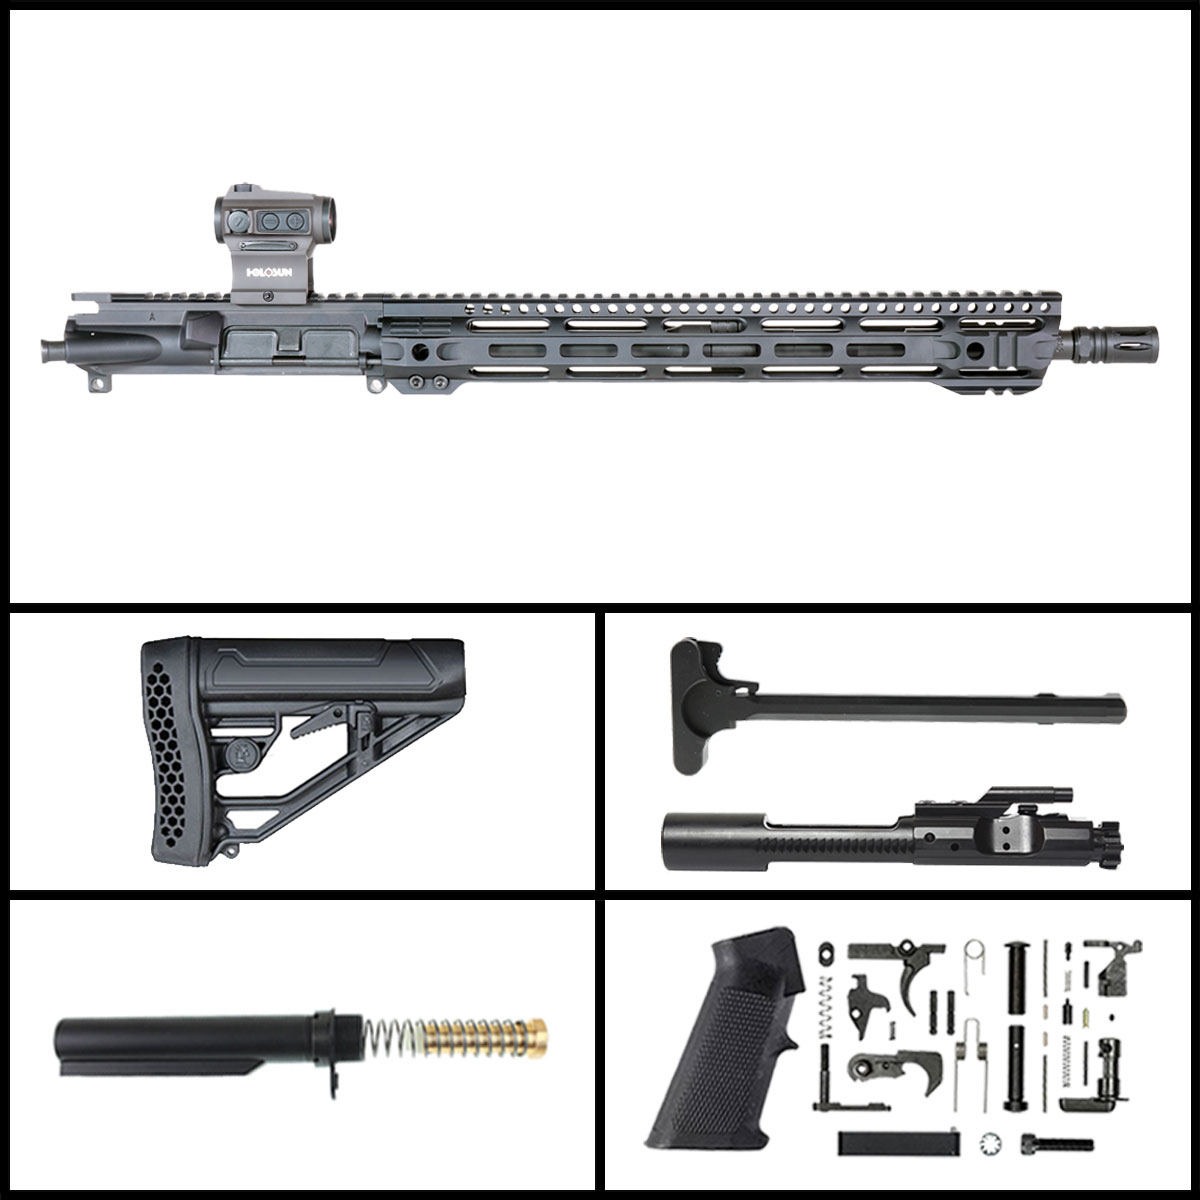 Davidson Defense 'Fading Wishes w/ Holosun Micro Red Dot' 16-inch AR-15 .350 Legend Phosphate Rifle Full Build Kit